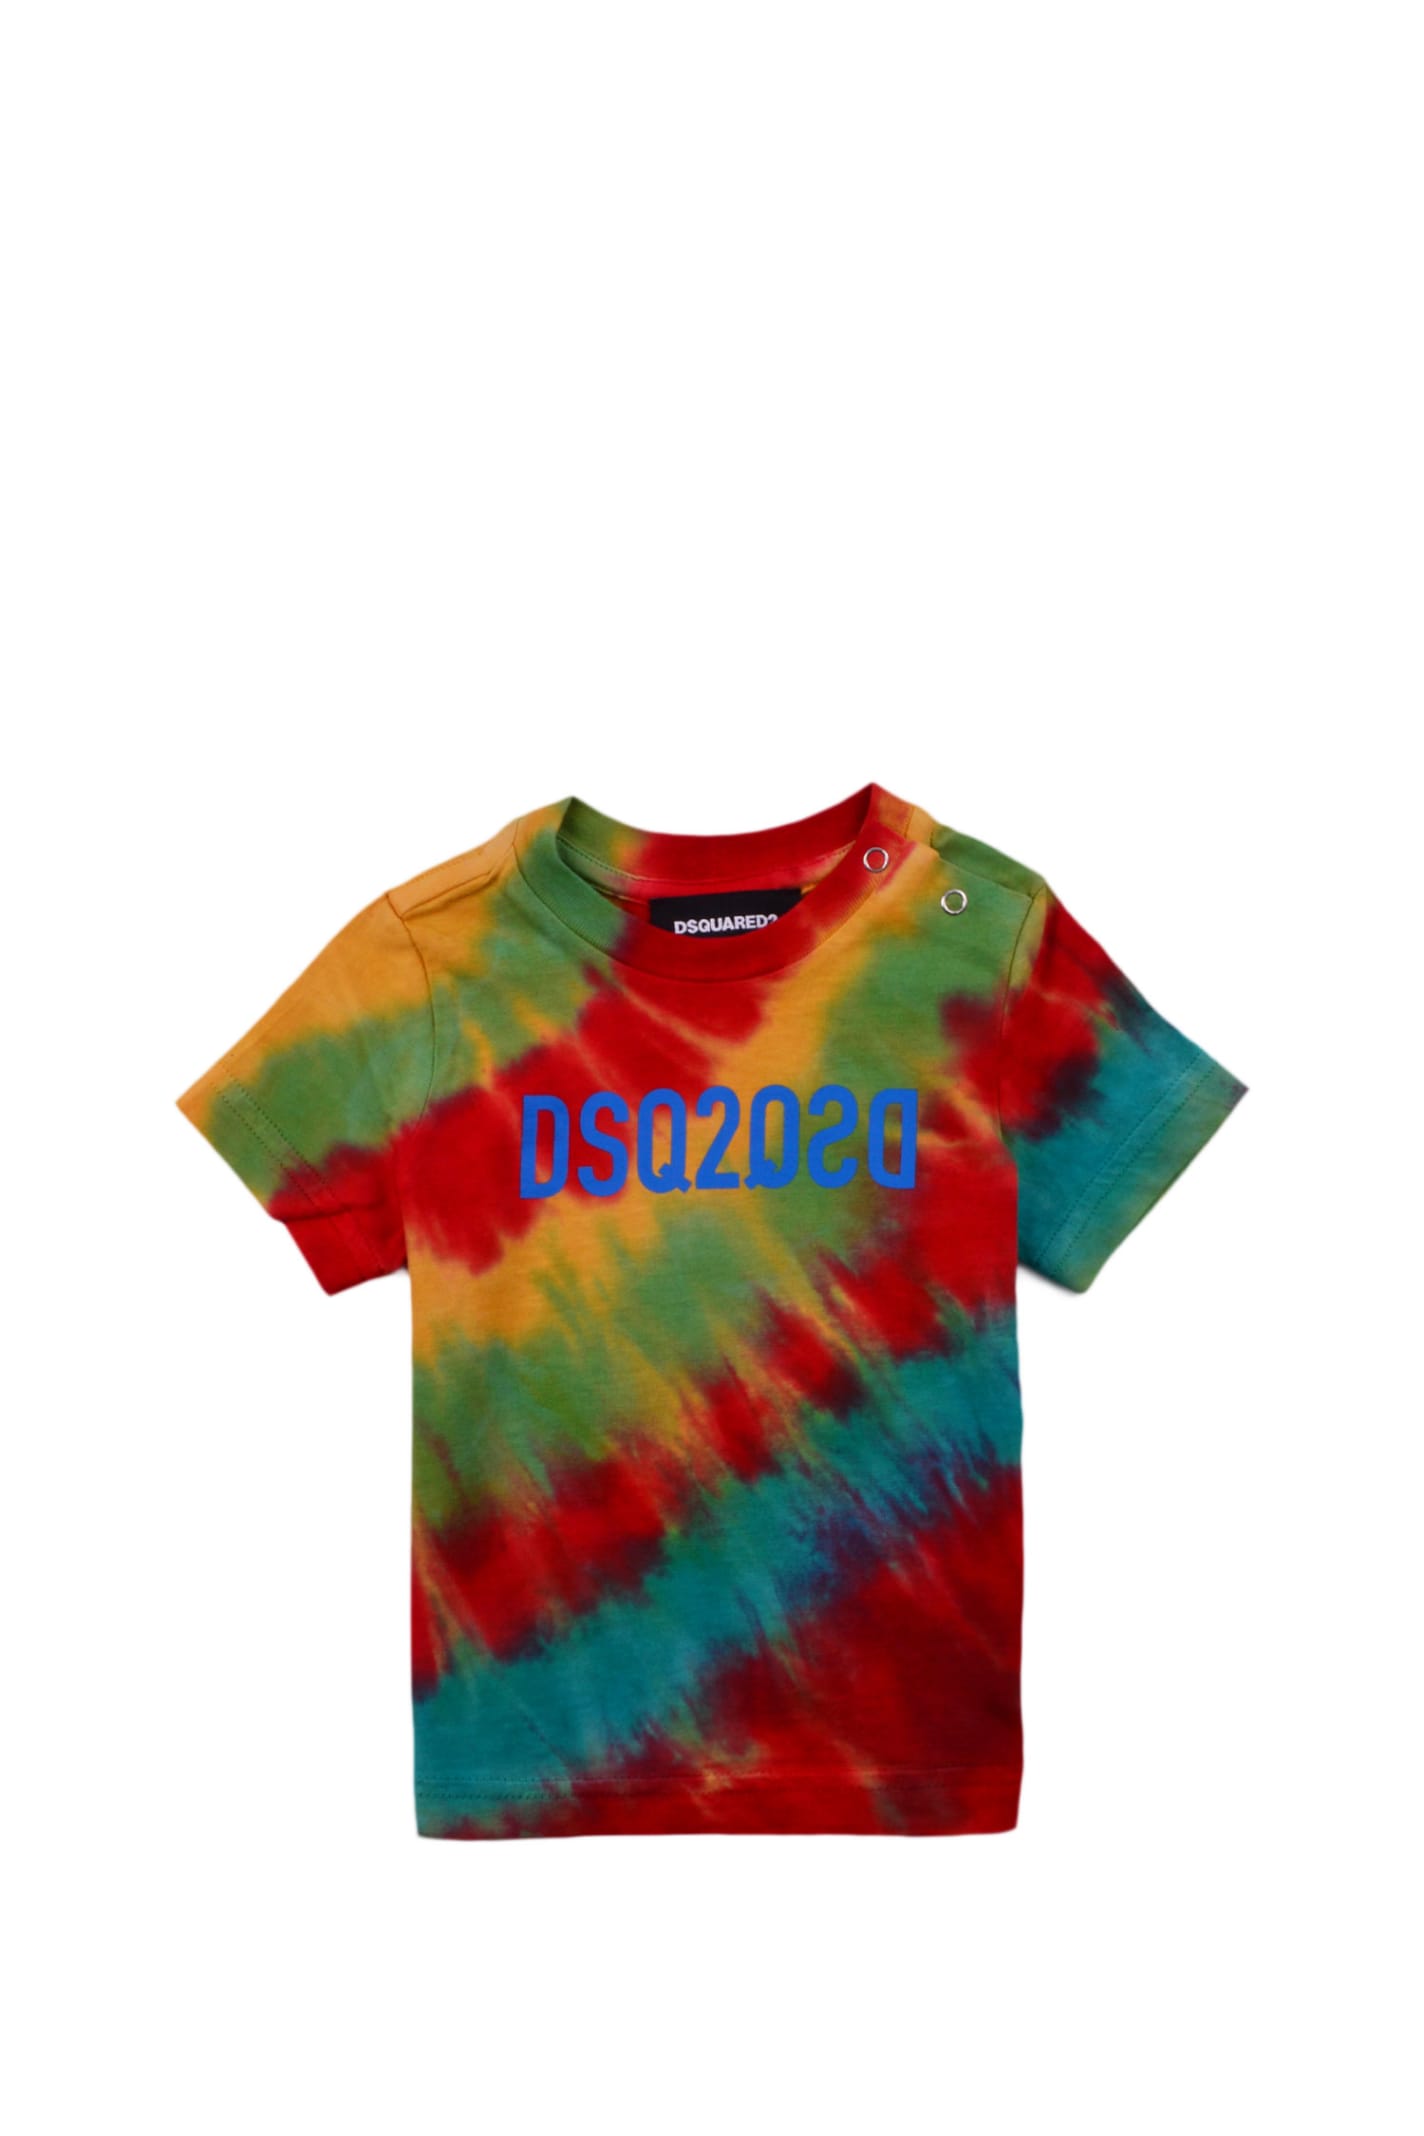 DSQUARED2 MULTICOLOR T-SHIRT WITH TIE DYE PRINT